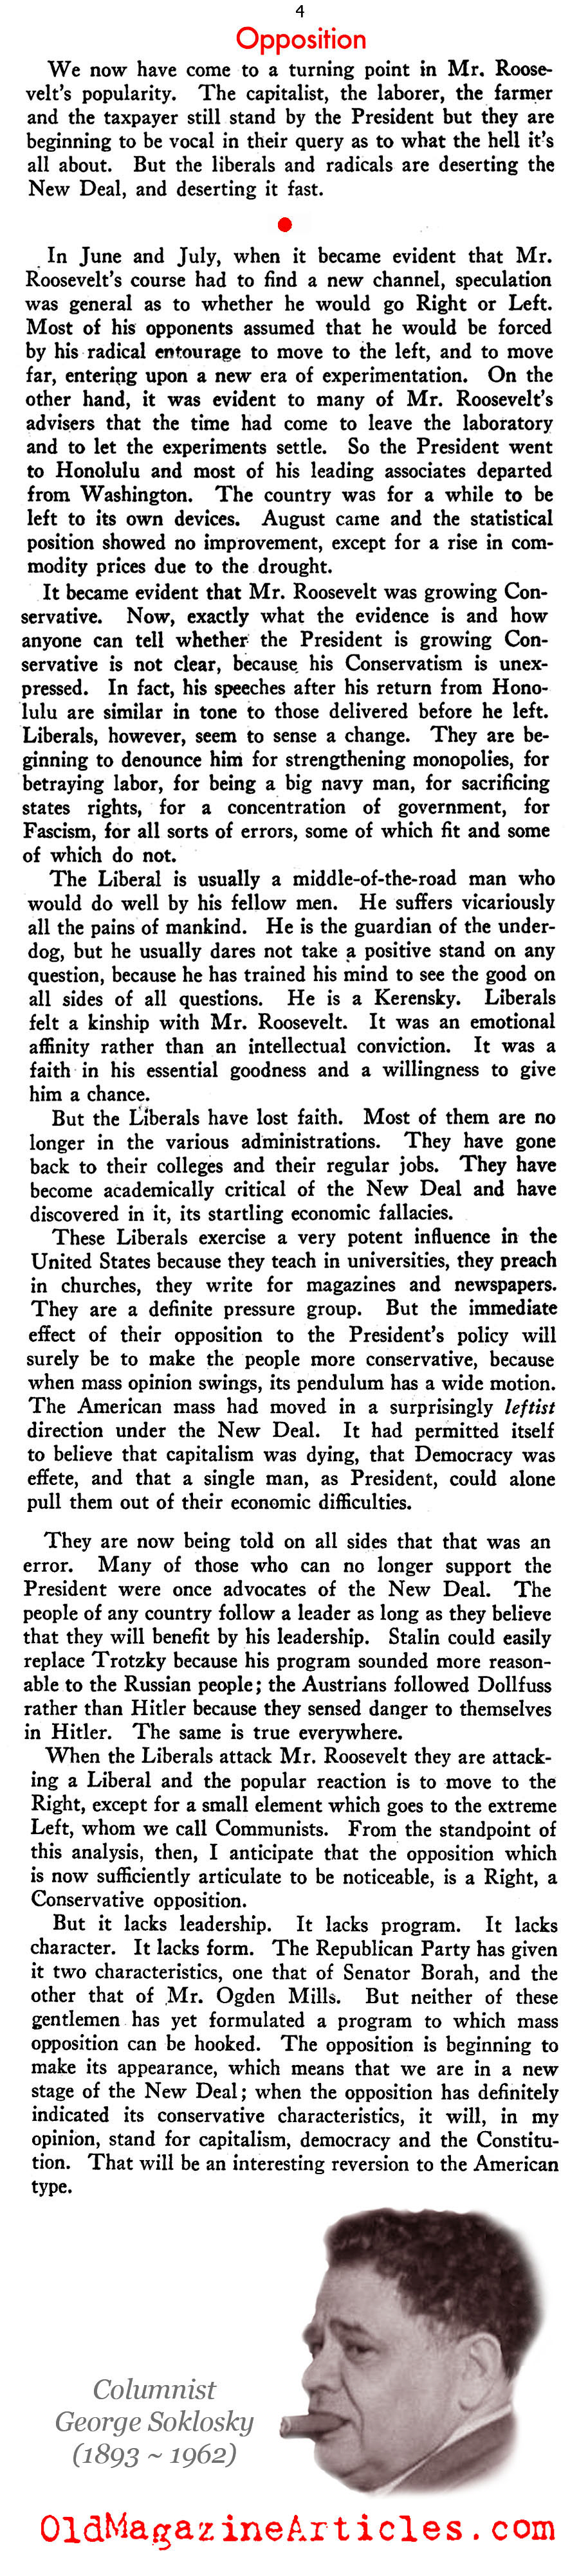 The Great Depression and the Failings of FDR (New Outlook Magazine, 1934)